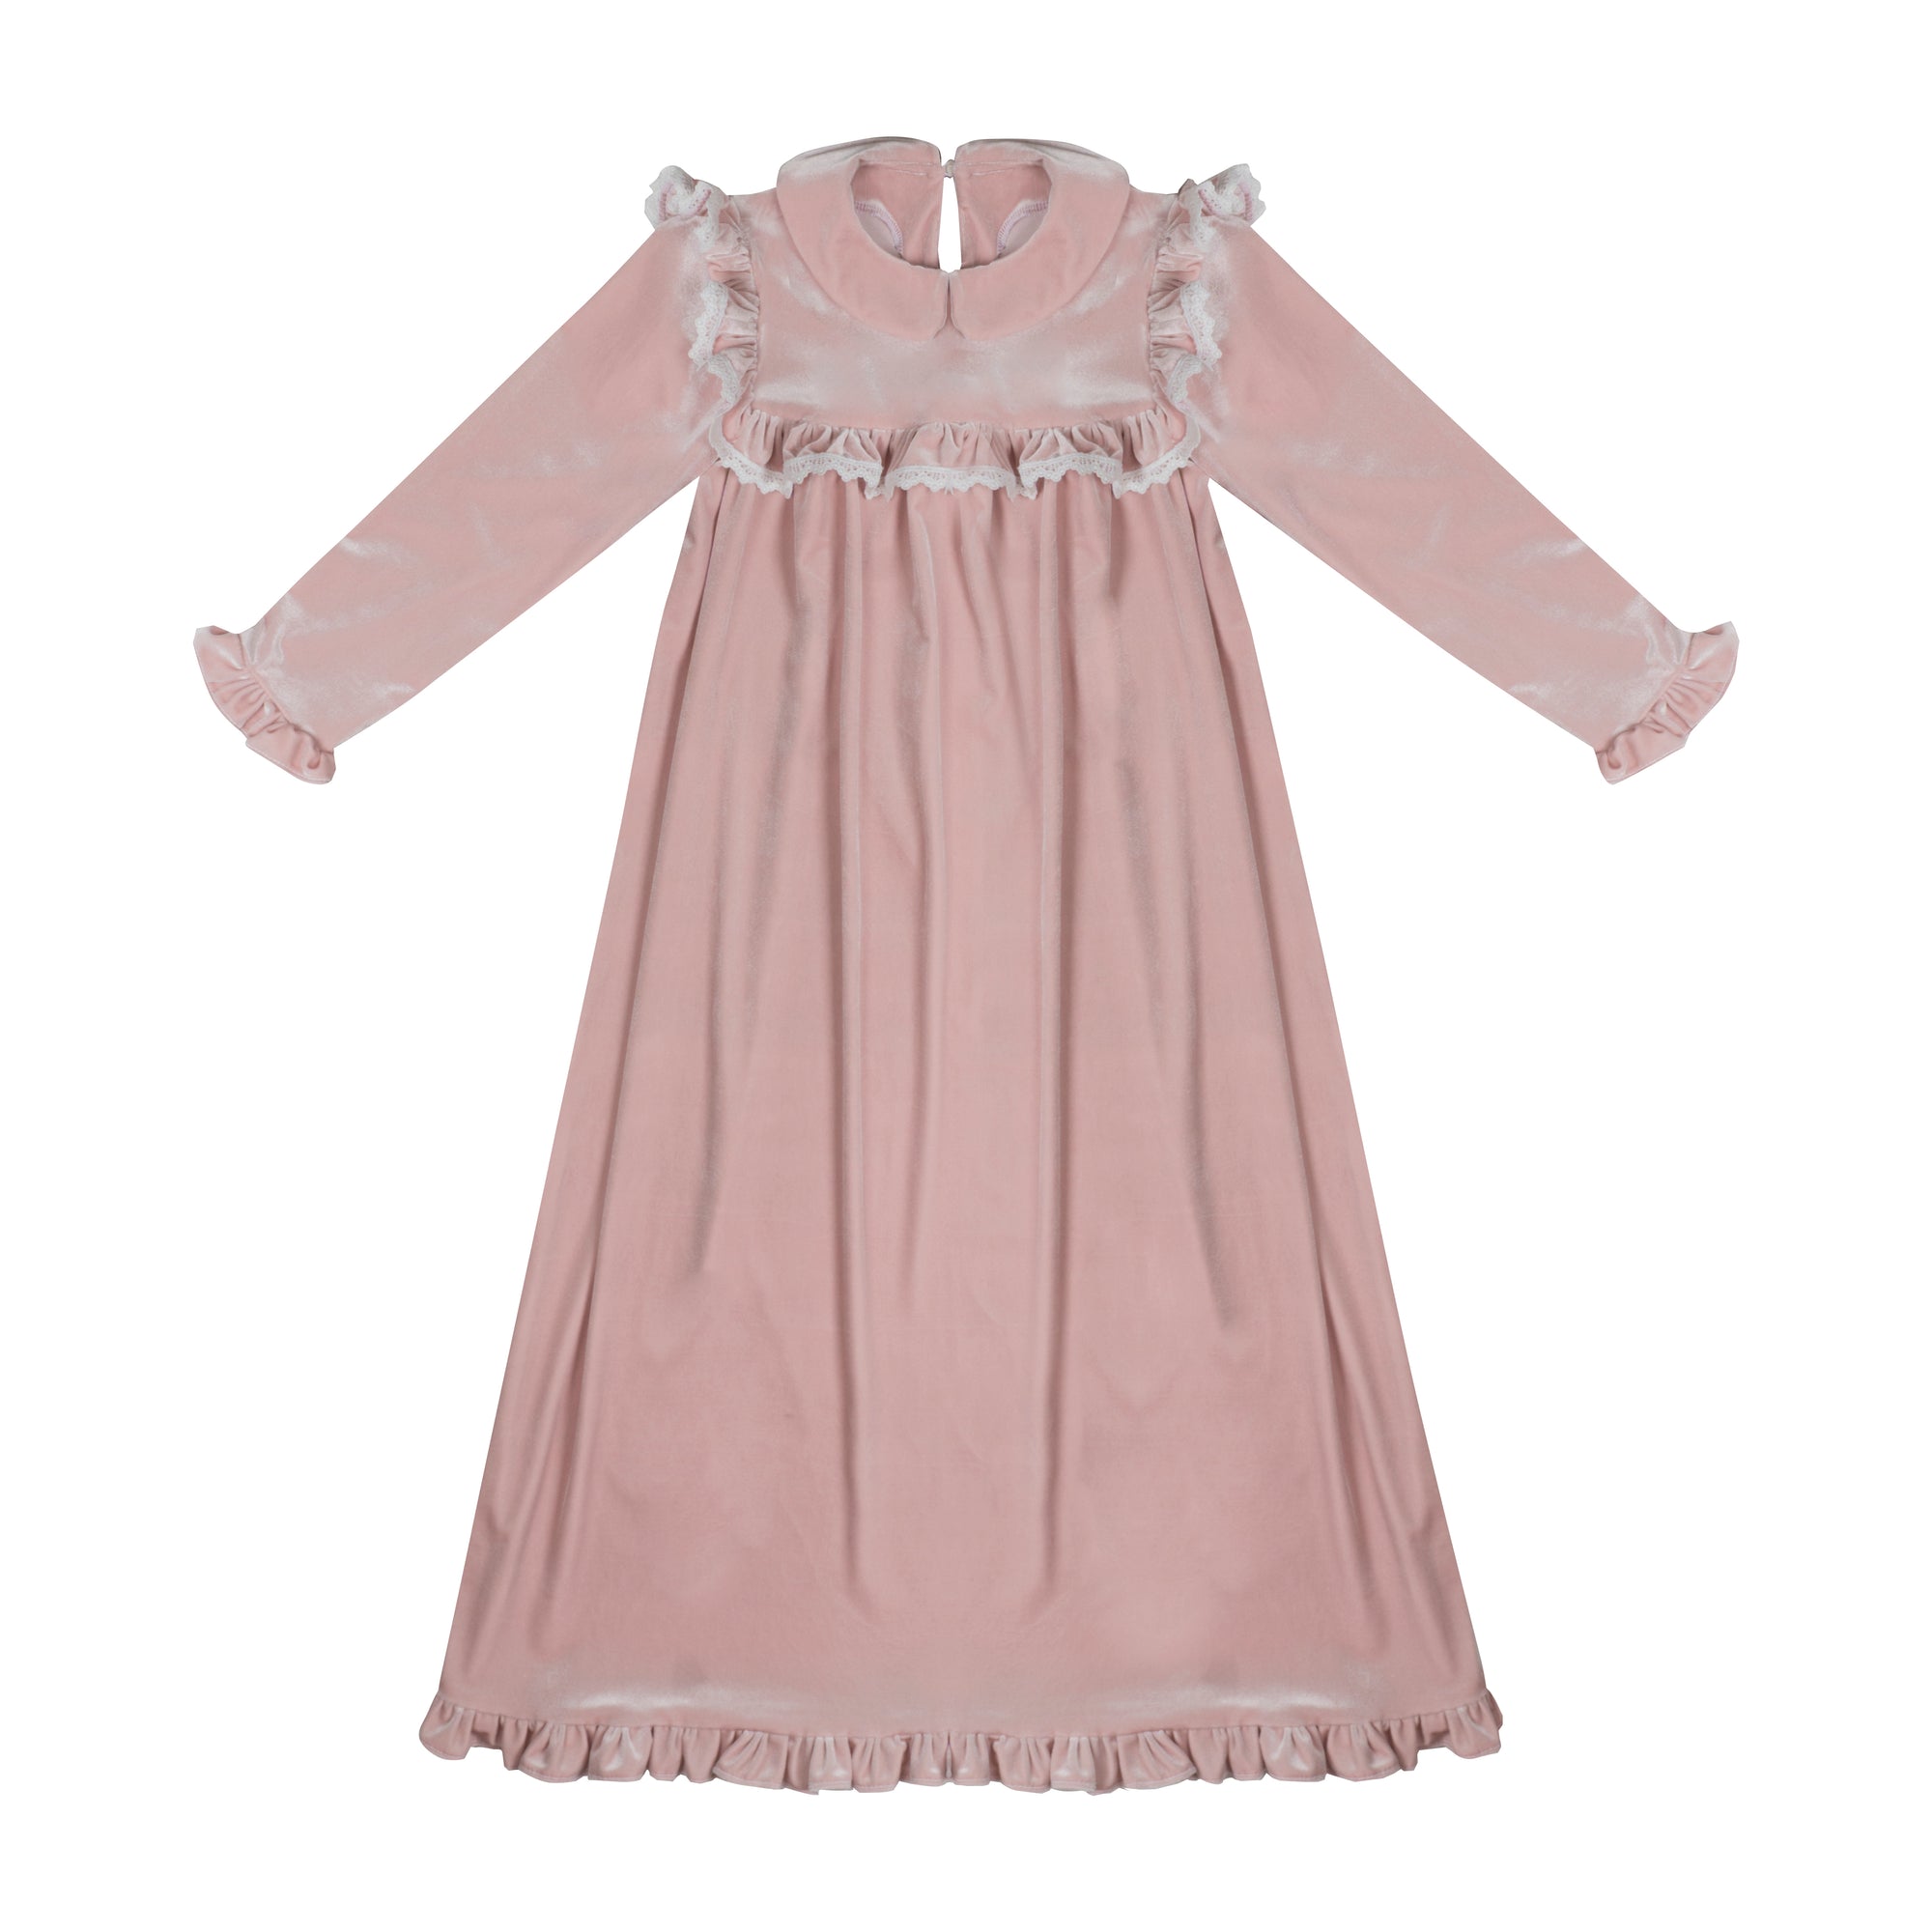 Pollyanna - Old Fashioned Nightgown - Pink